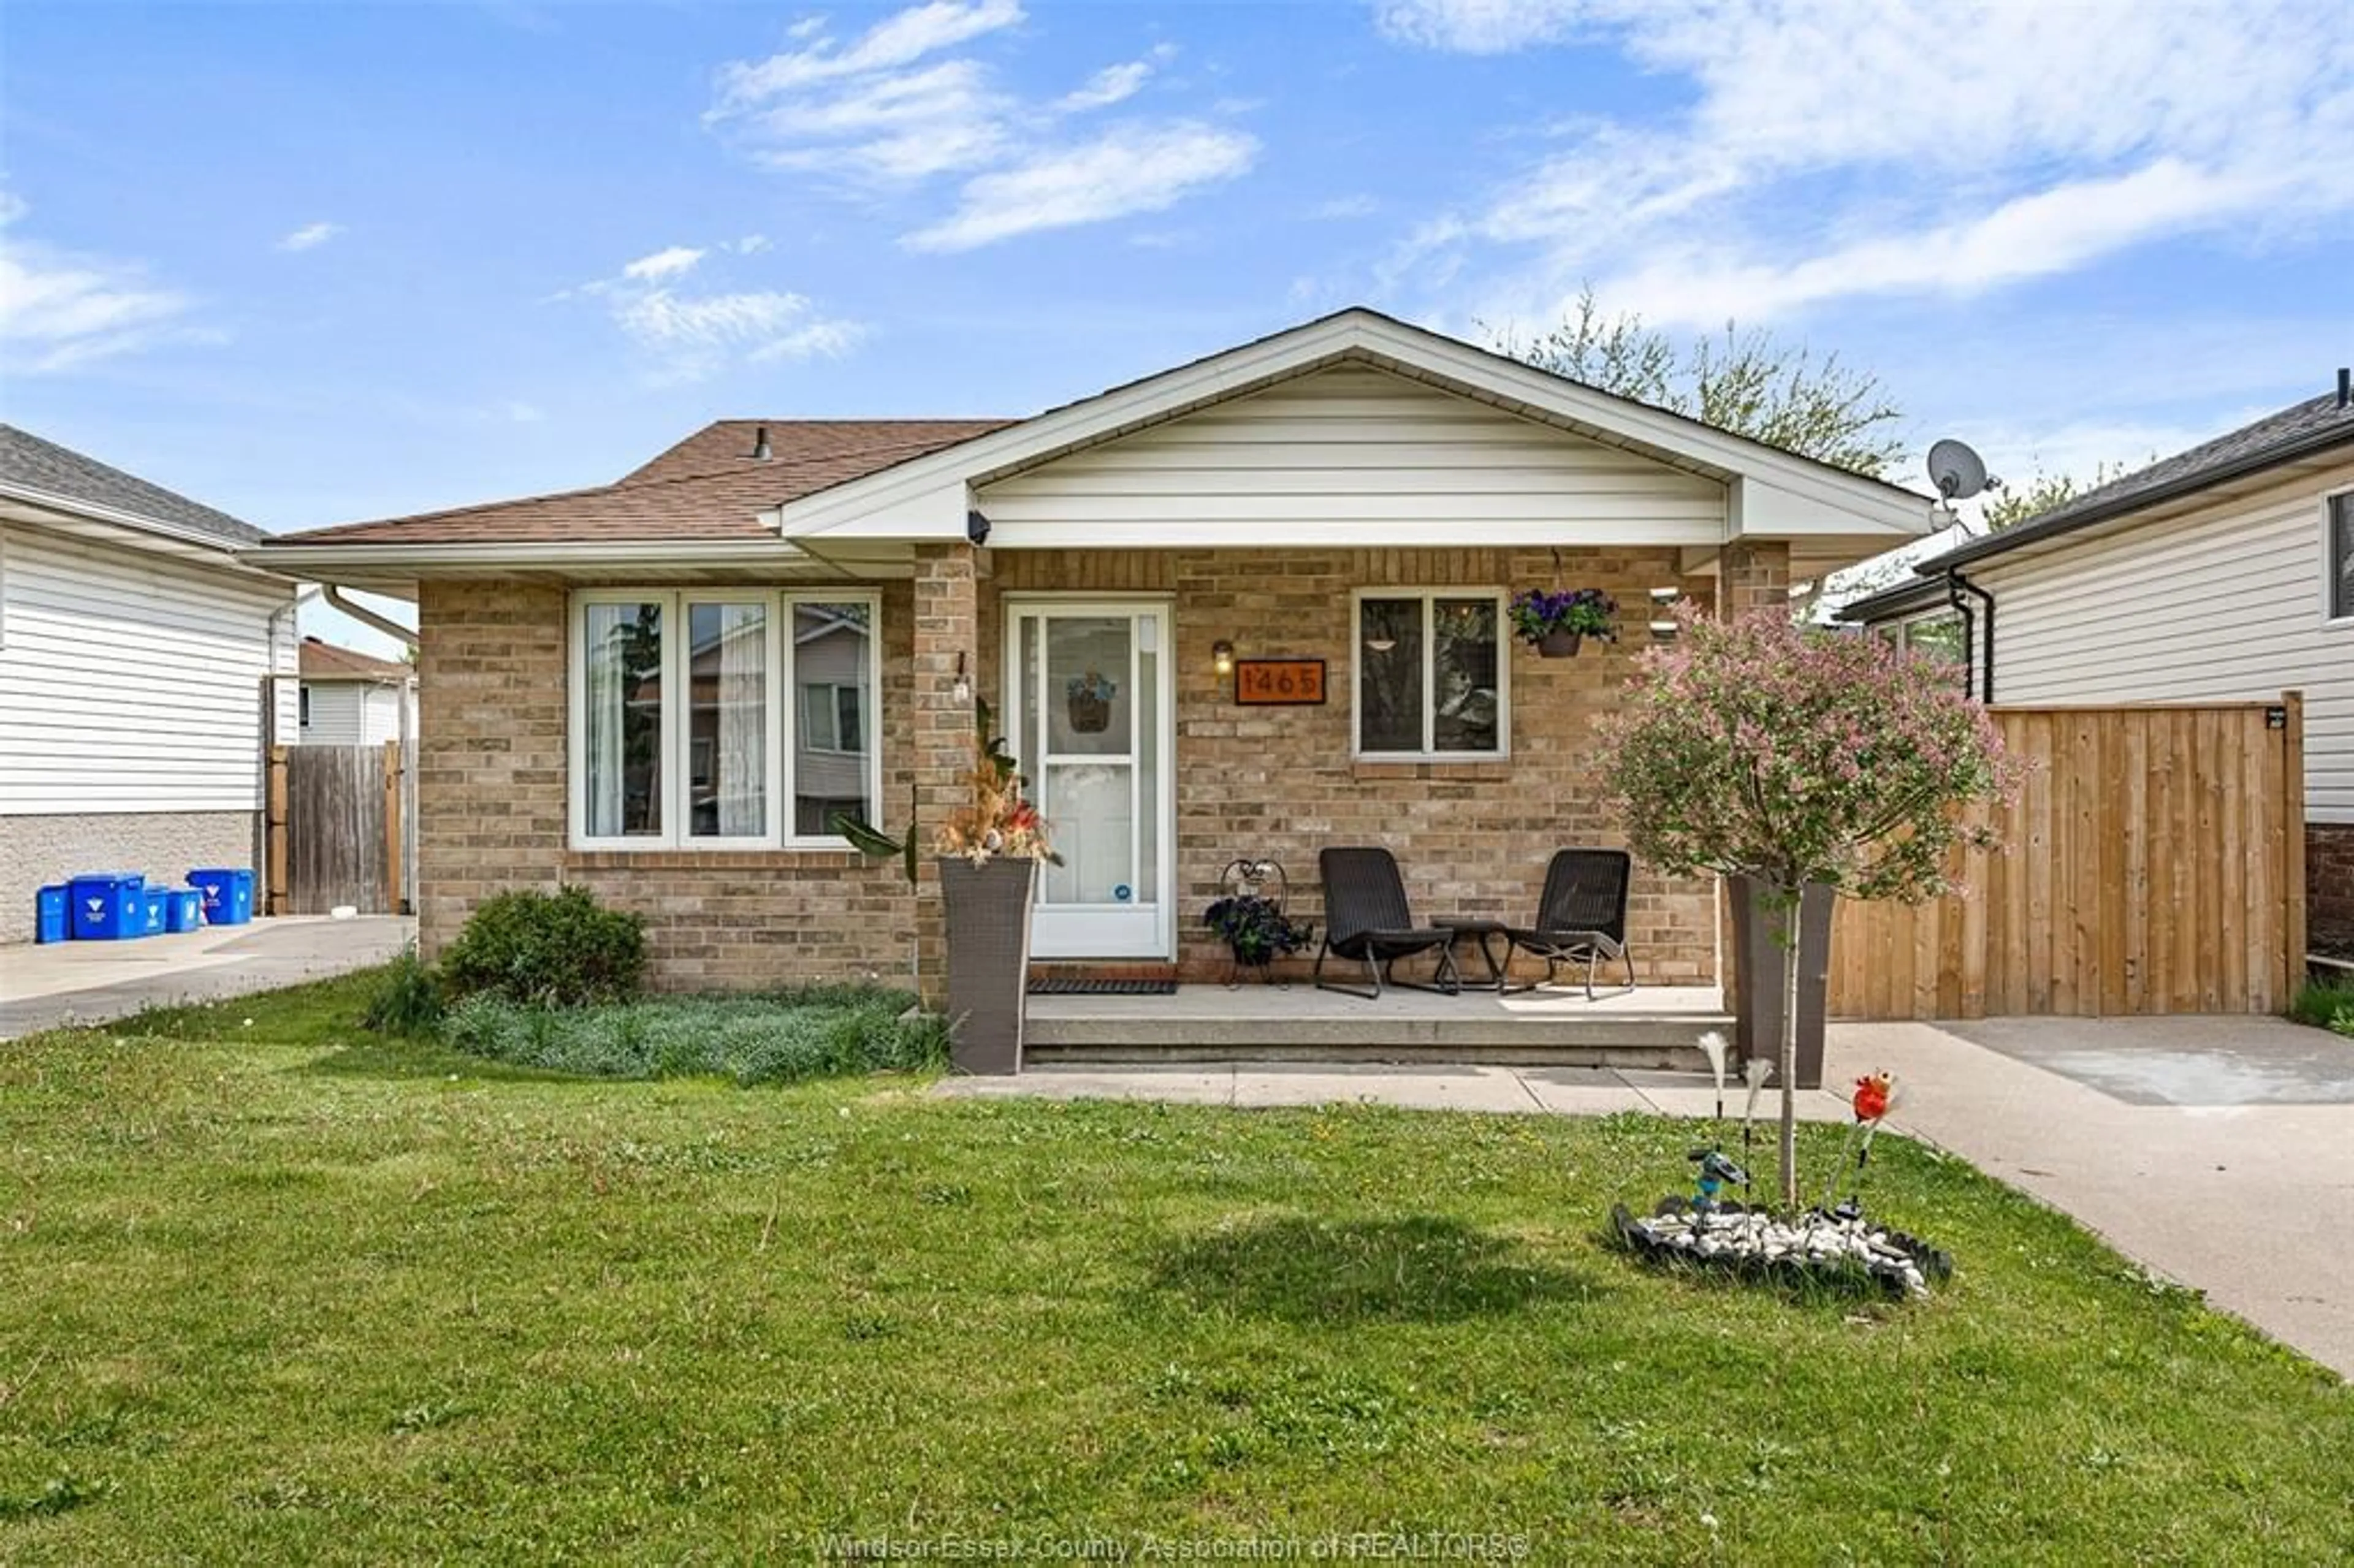 Home with brick exterior material for 1465 FOSTER Ave, Windsor Ontario N8W 5P8